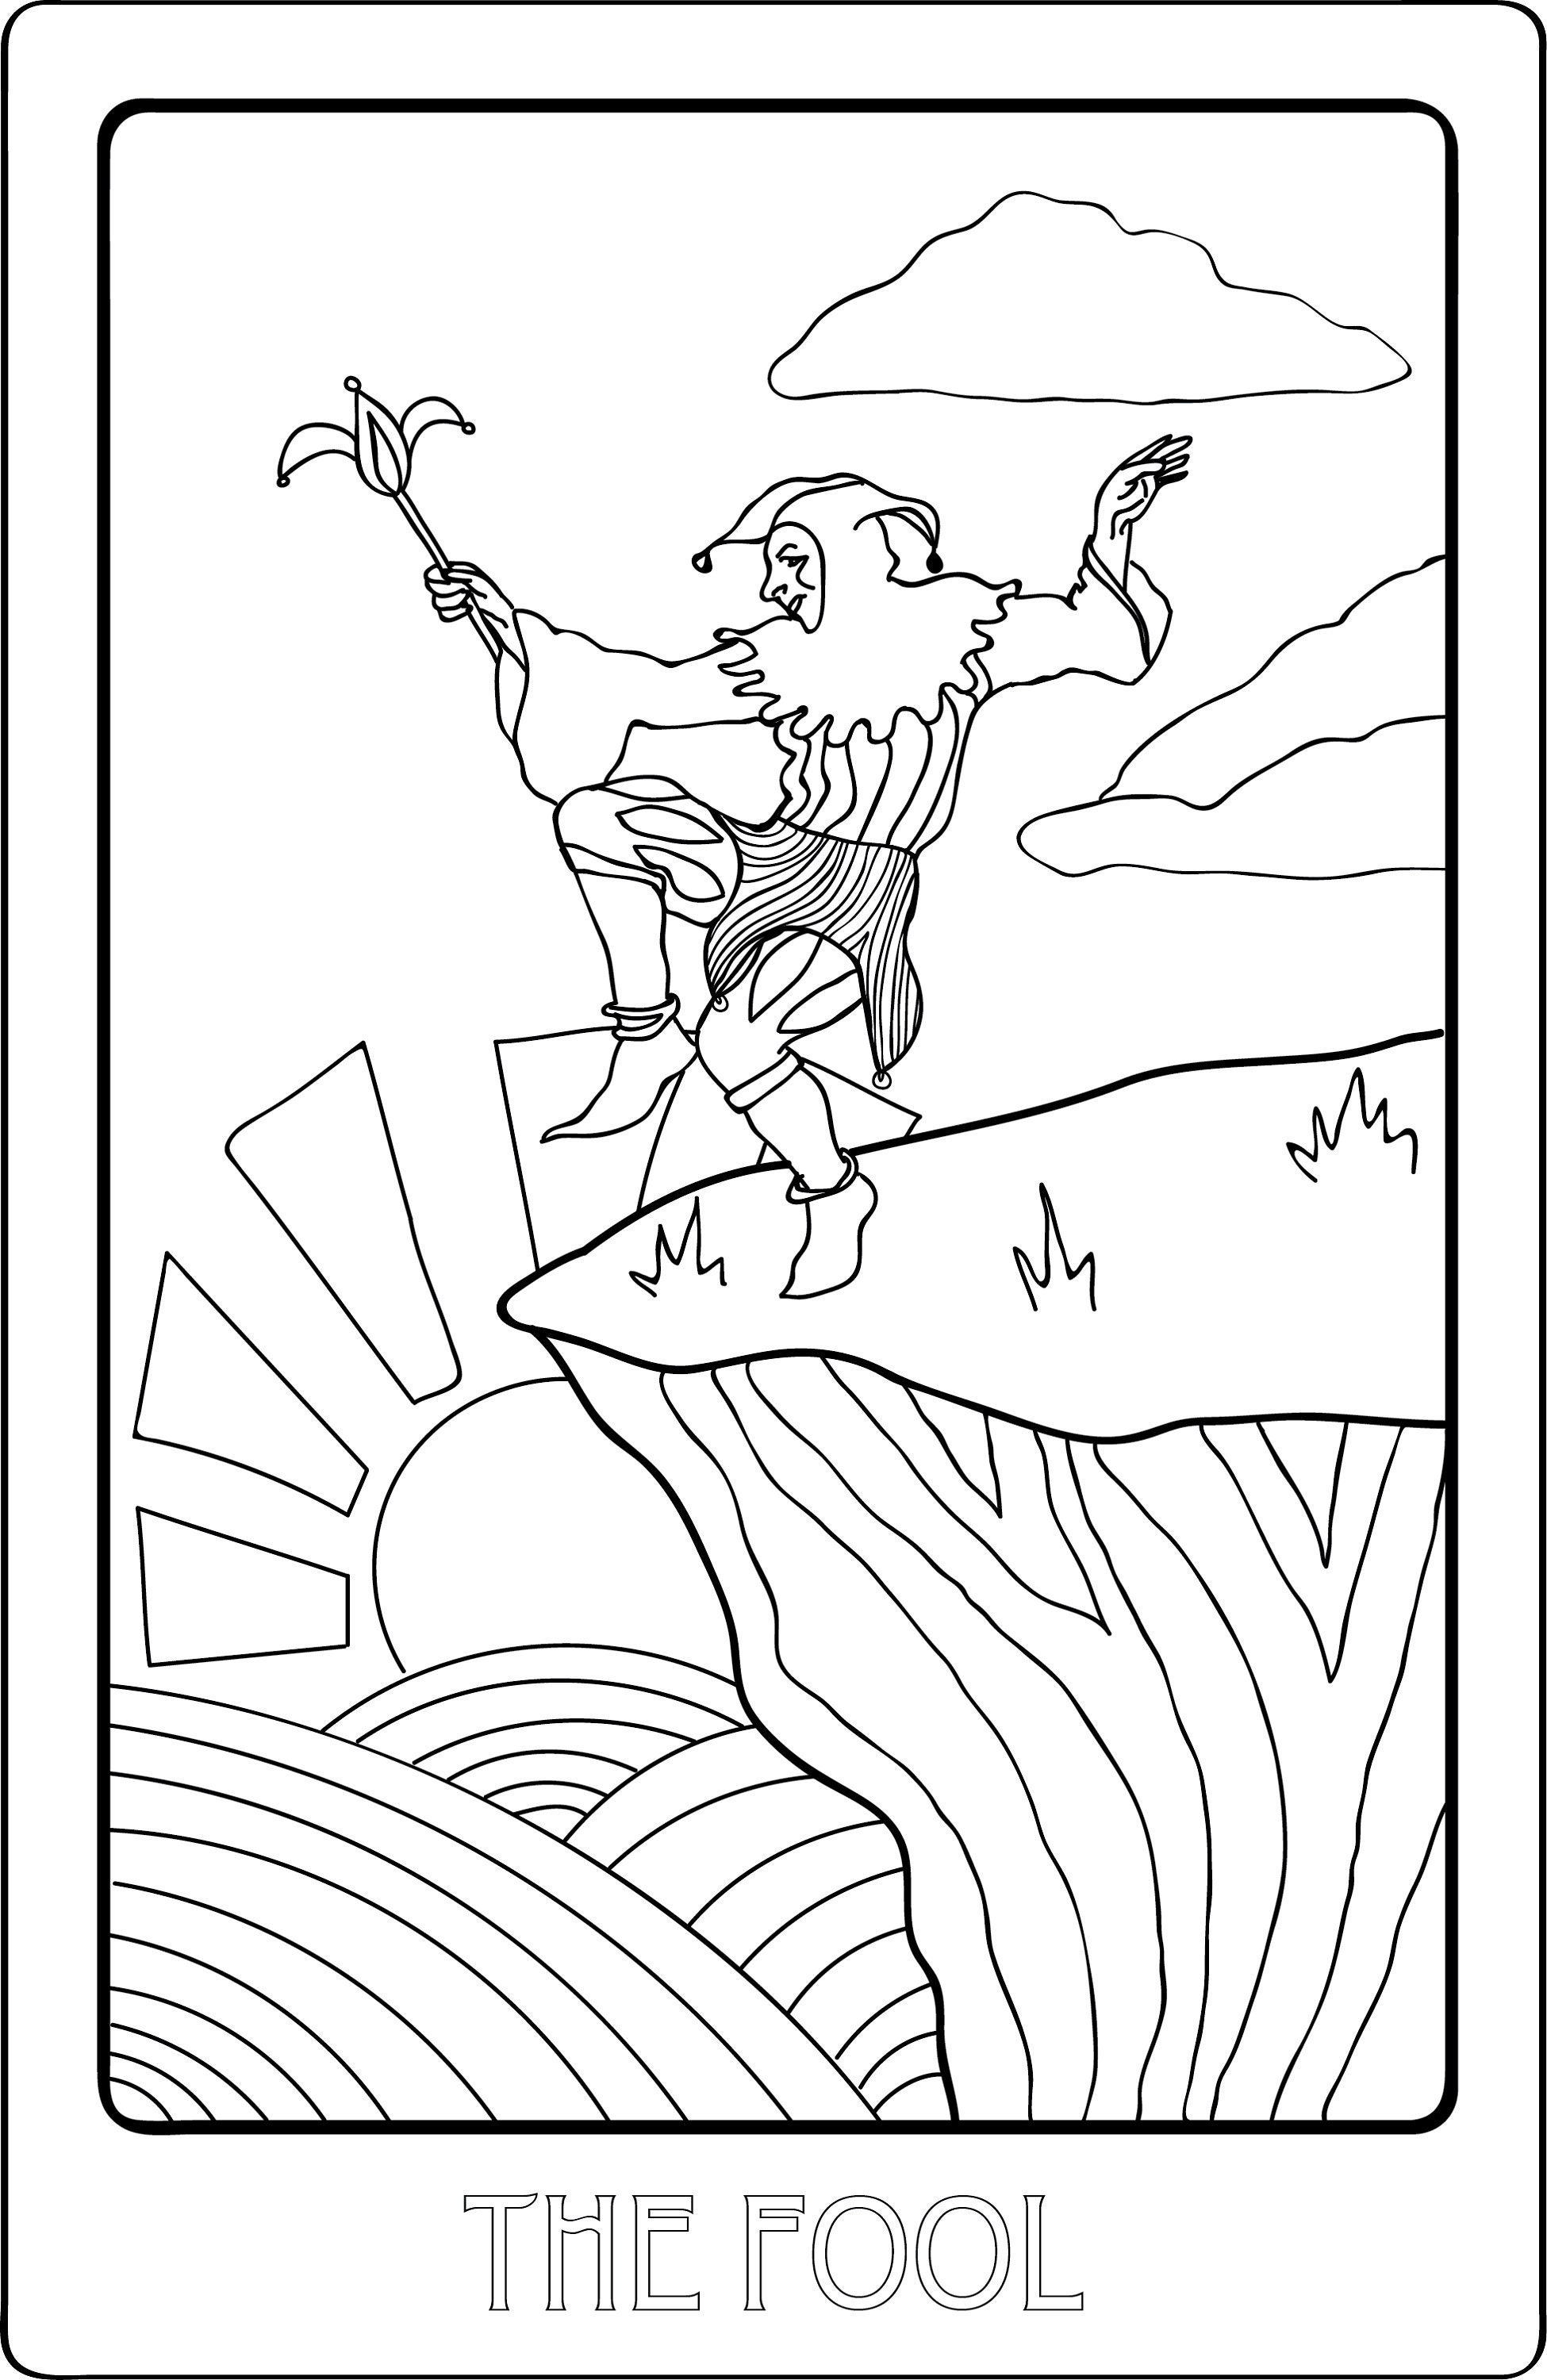 Tarot Card Coloring Page The Fool | Etsy